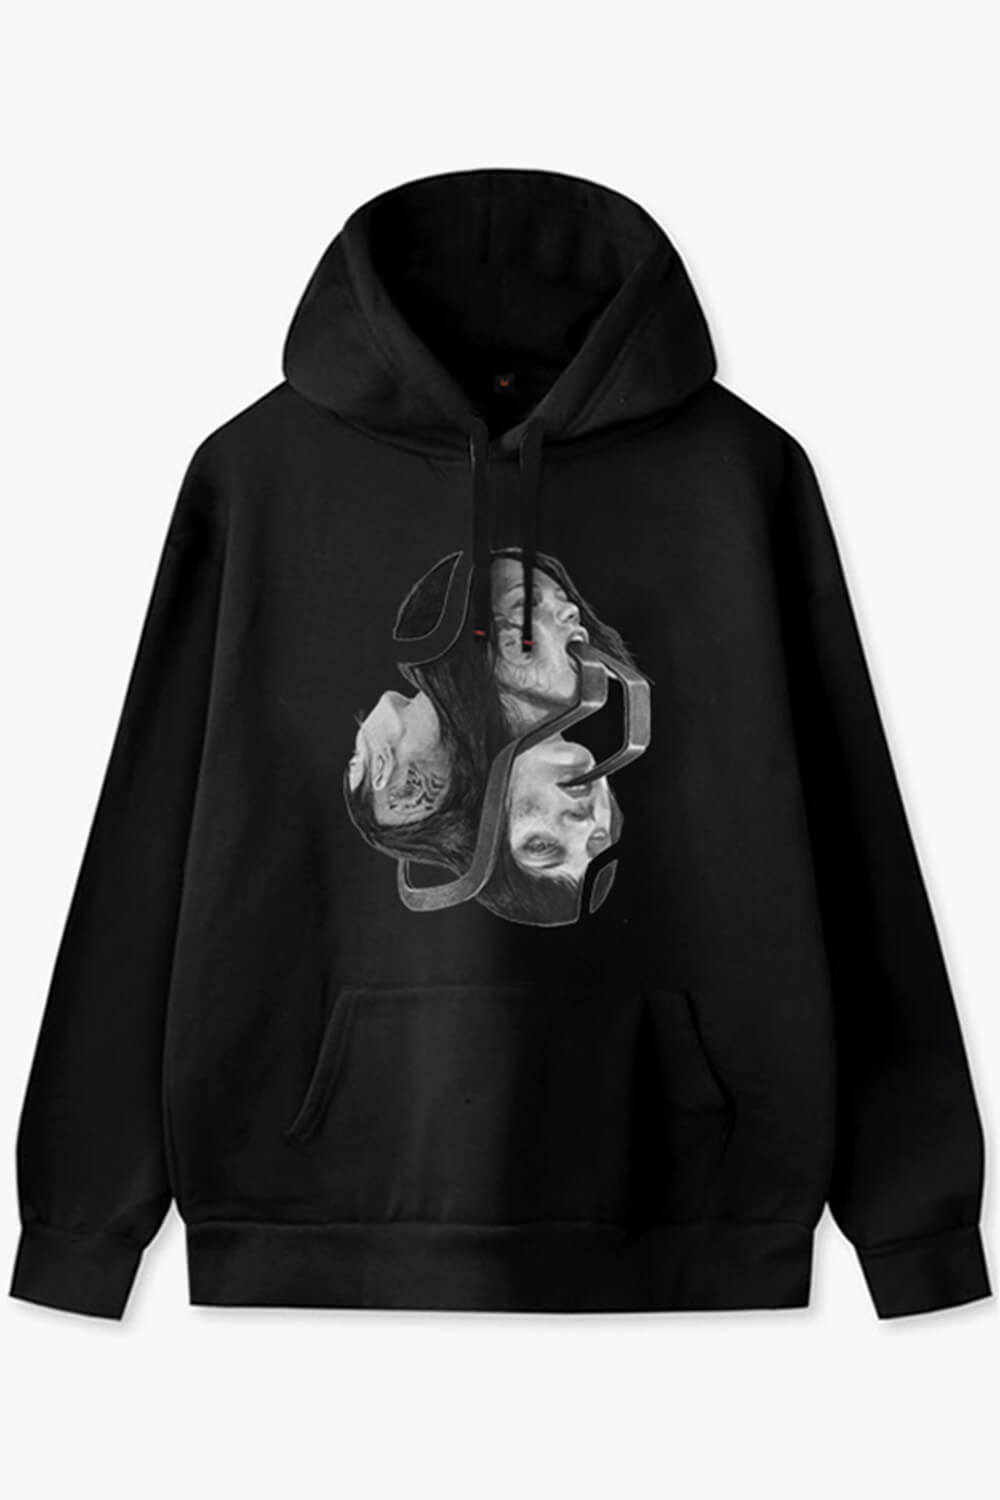 Anxiety and Sadness Aesthetic Hoodie Many Tongues